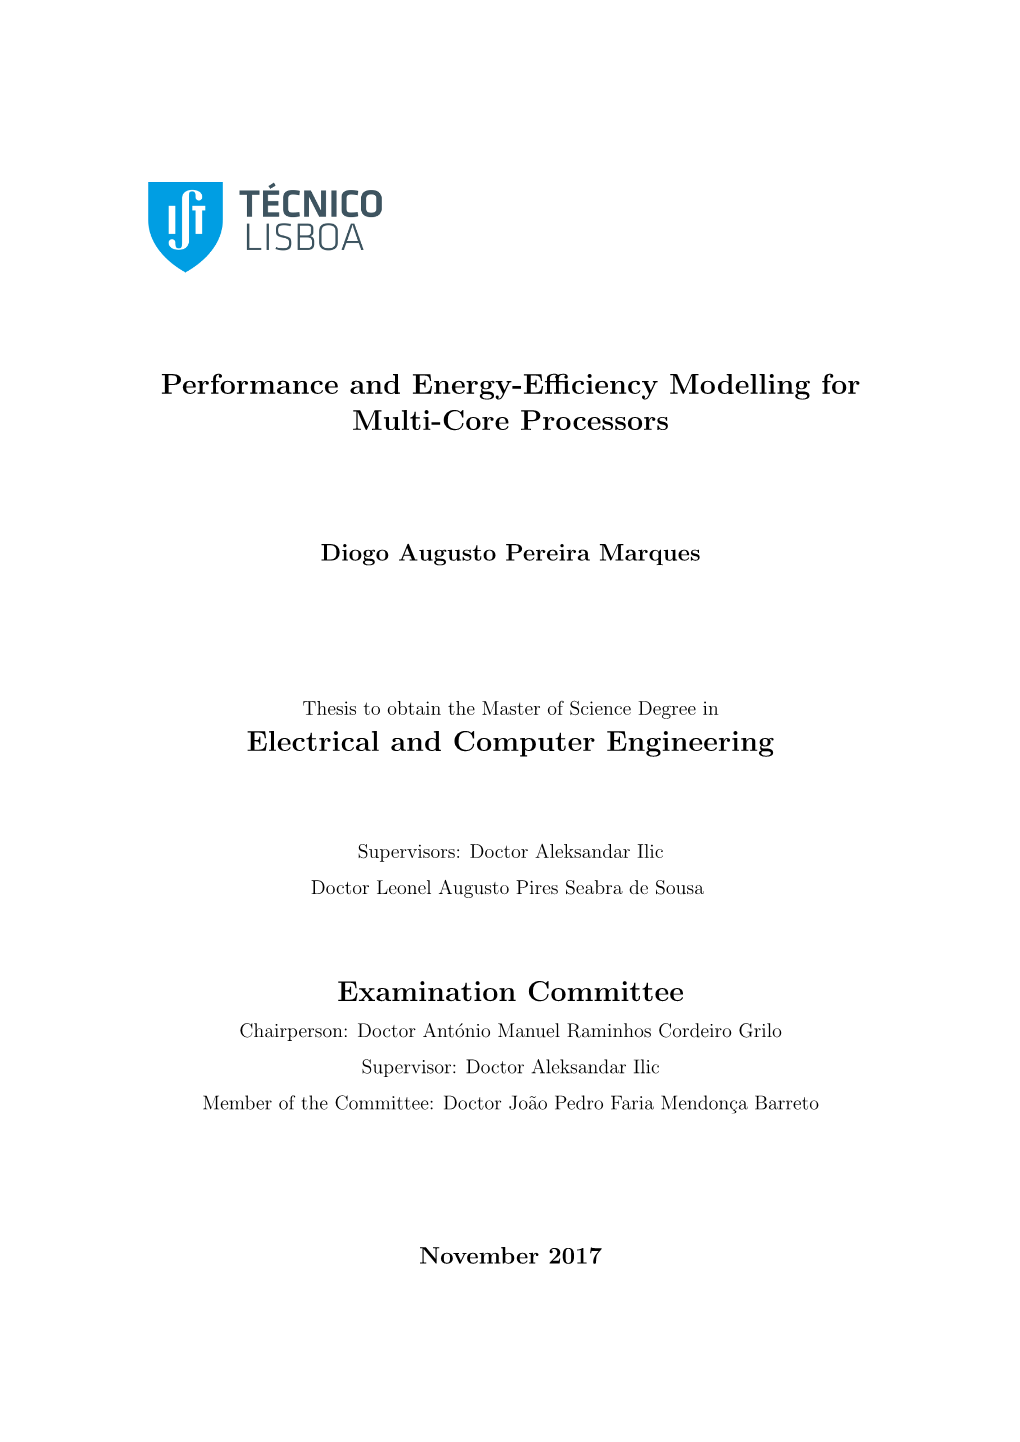 Performance and Energy-Efficiency Modelling for Multi-Core Processors